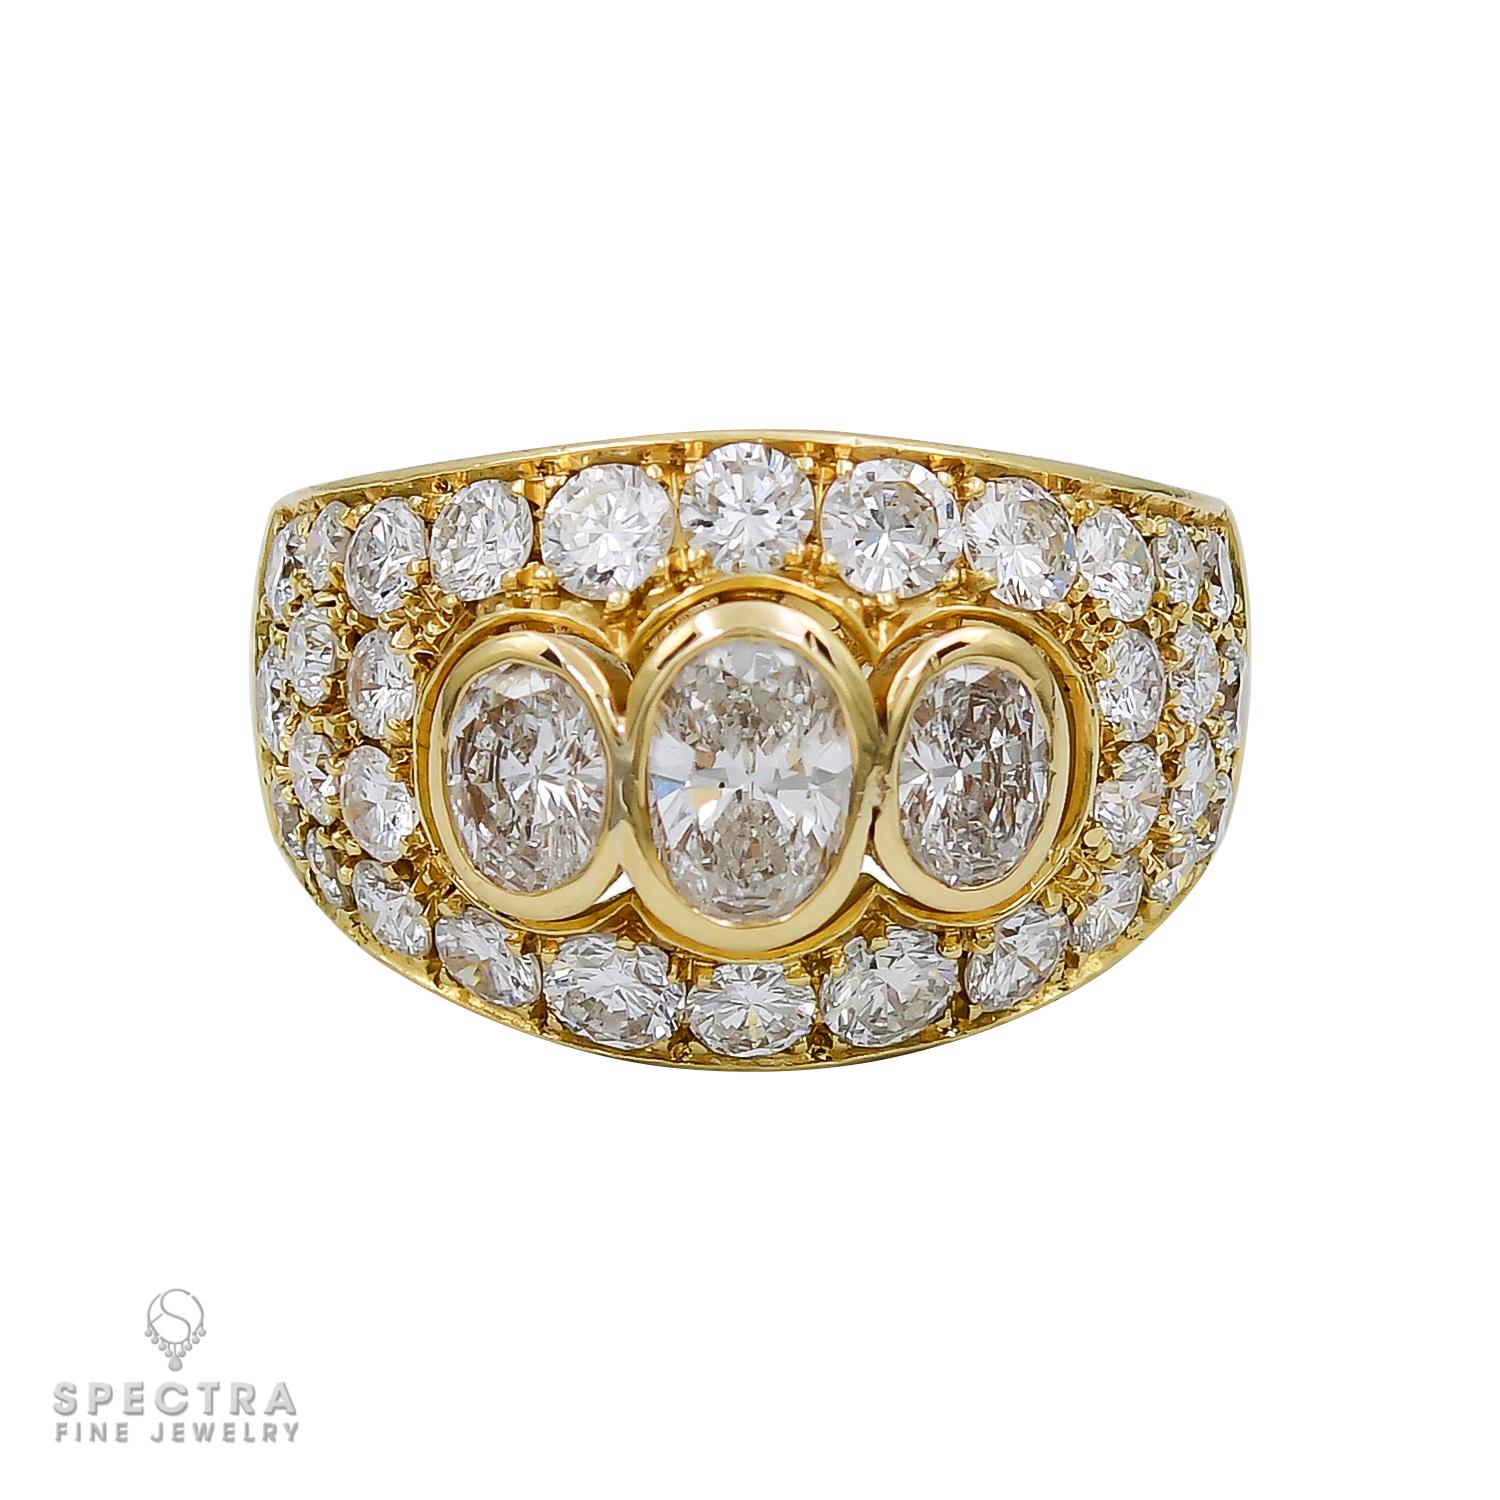 A beautiful cocktail ring made by Bulgari in Italy.
The ring is featuring three oval diamonds in the center accented by round diamonds. 
Total diamond weight is 4 carats. Diamonds are estimated as E-F-G color, VS clarity.
Metal 18k yellow gold,